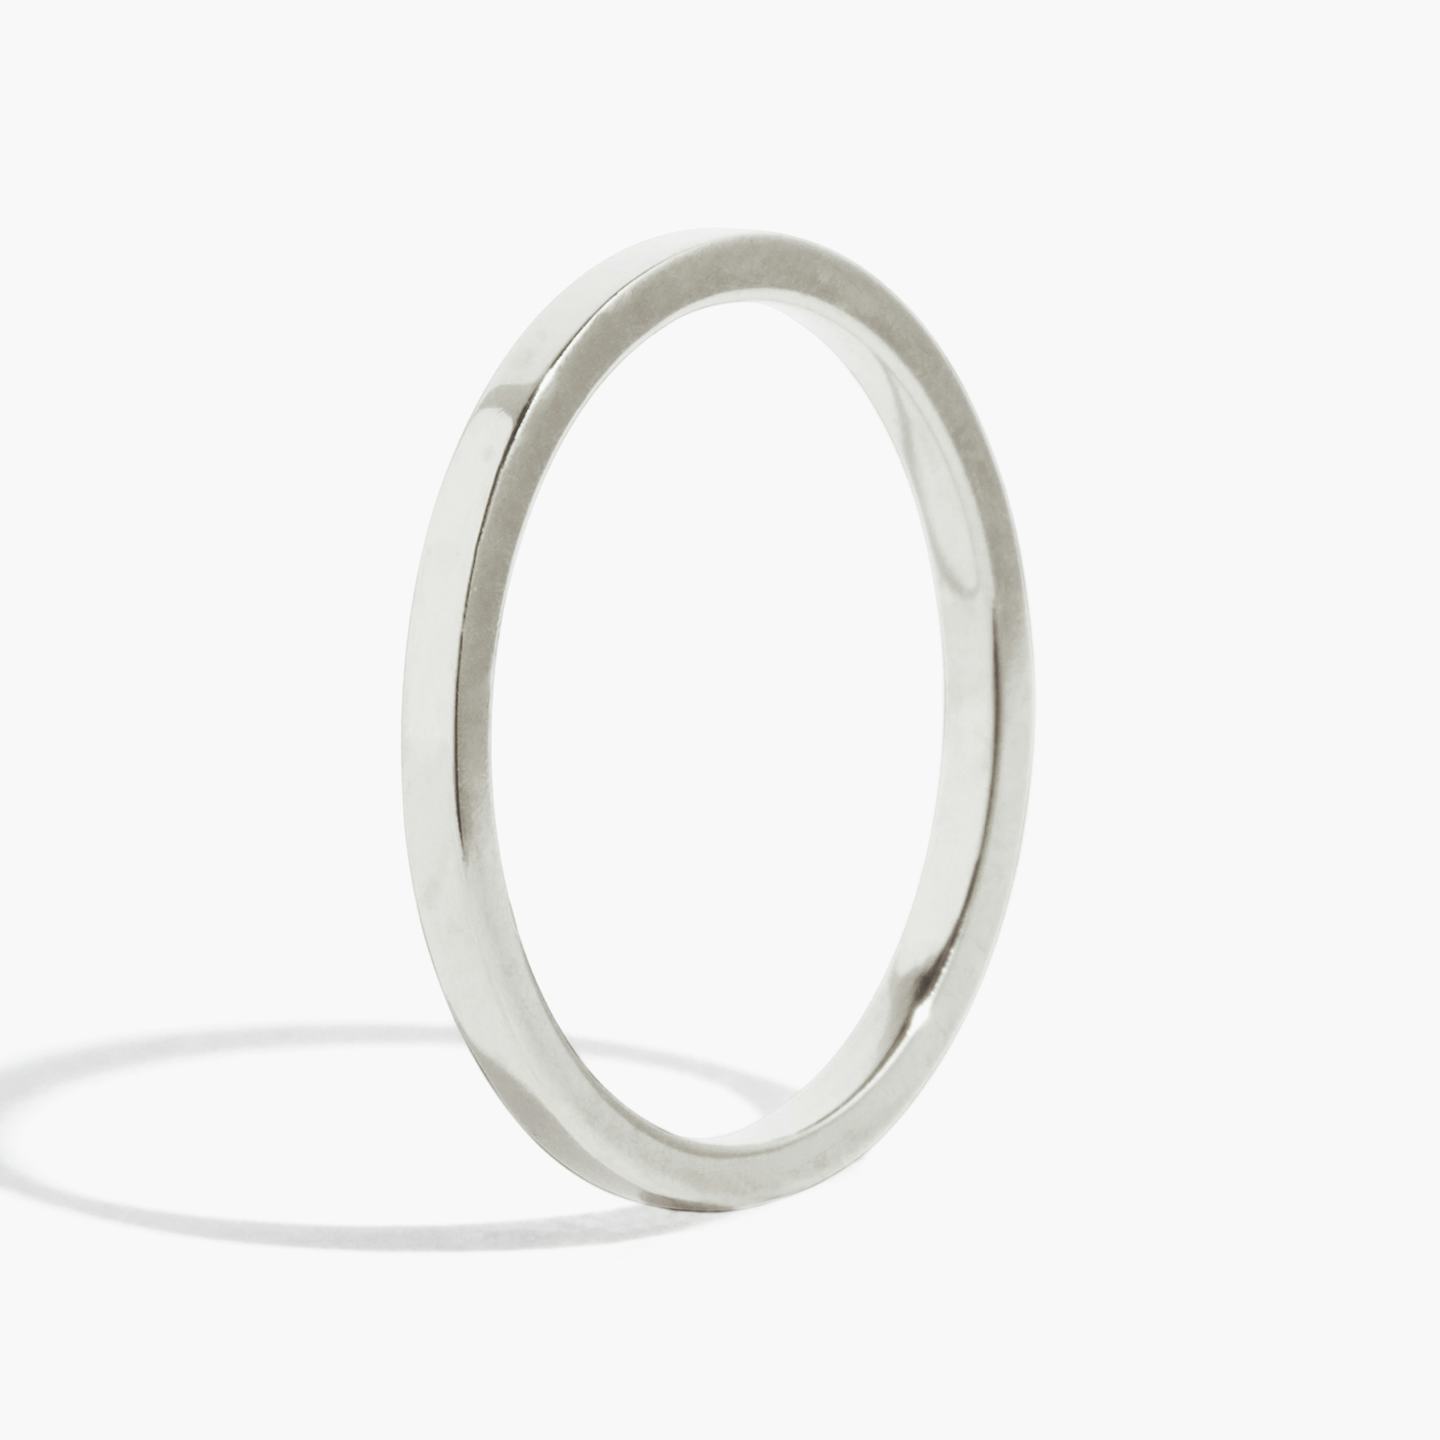 The Flat | 18k | 18k White Gold | Band width: Small - 1.5mm